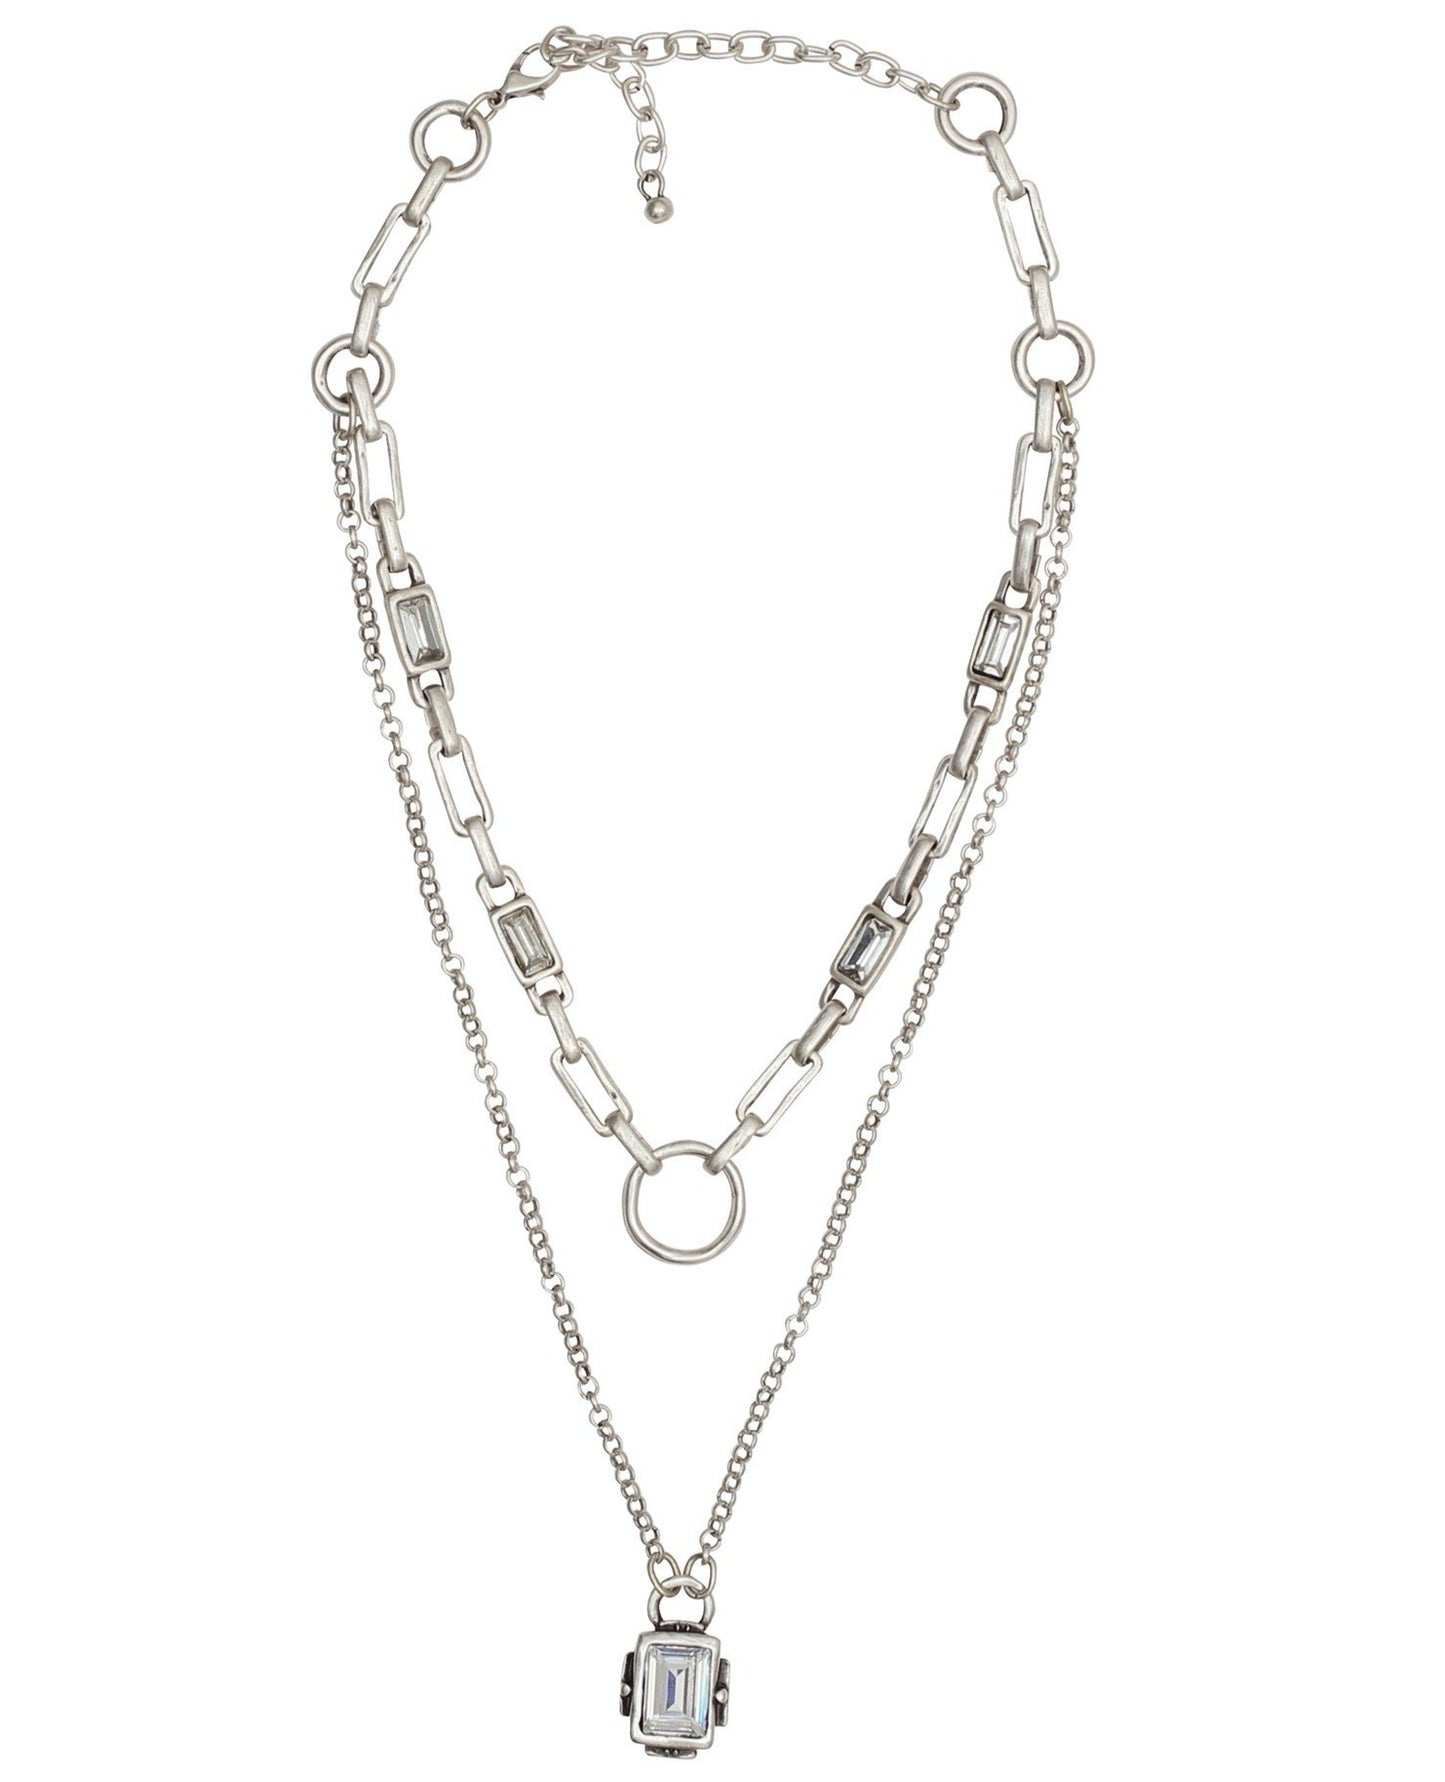 Pewter and Crystal Layered Necklace